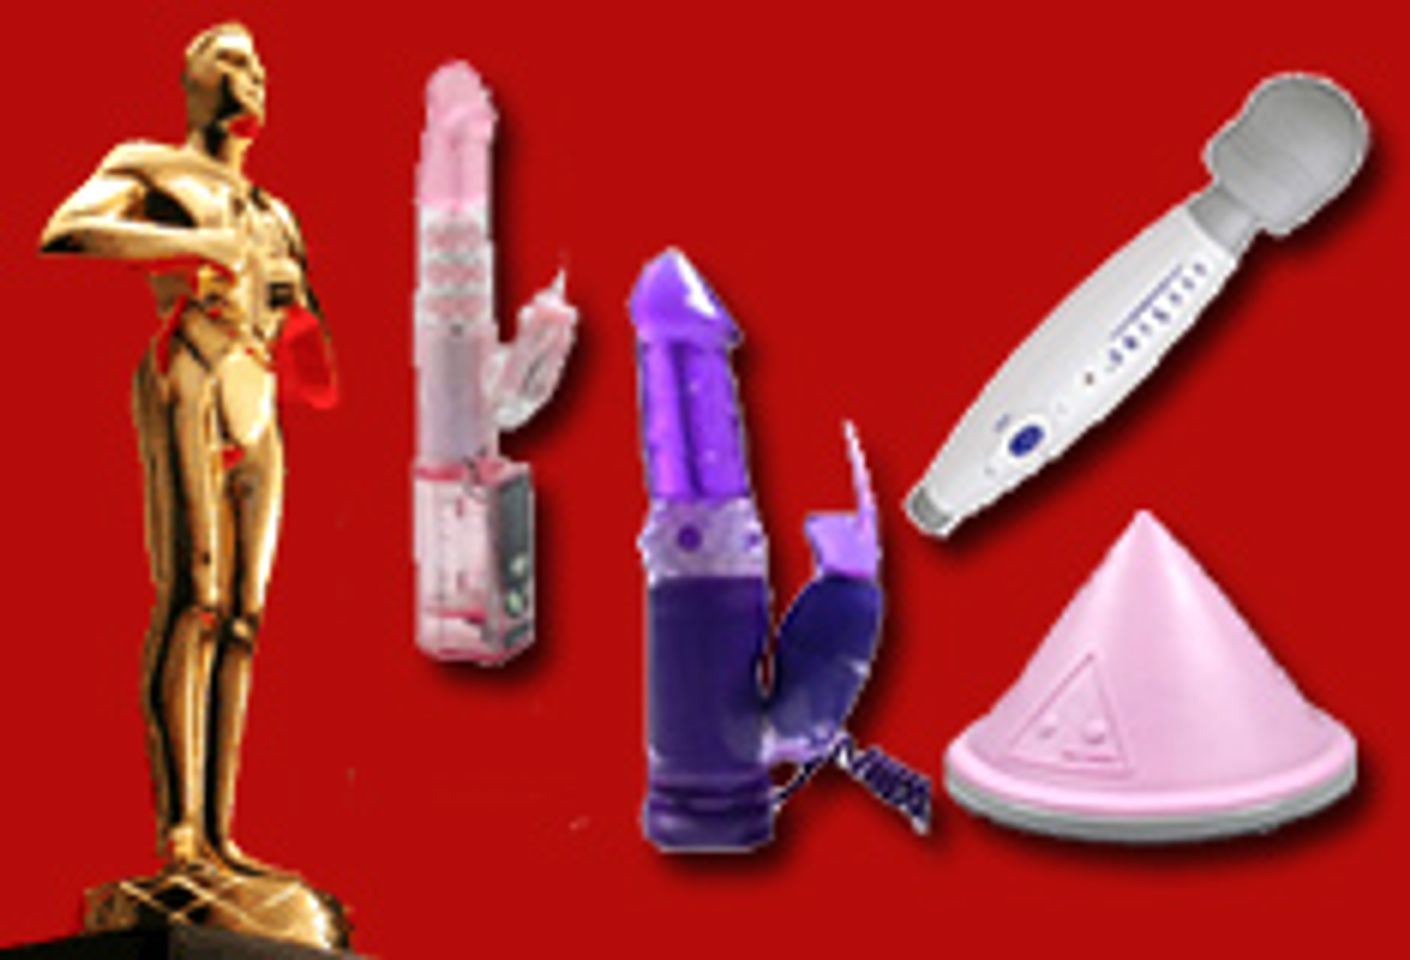 Spicy Gear Announces Winners of Sex Toy Awards